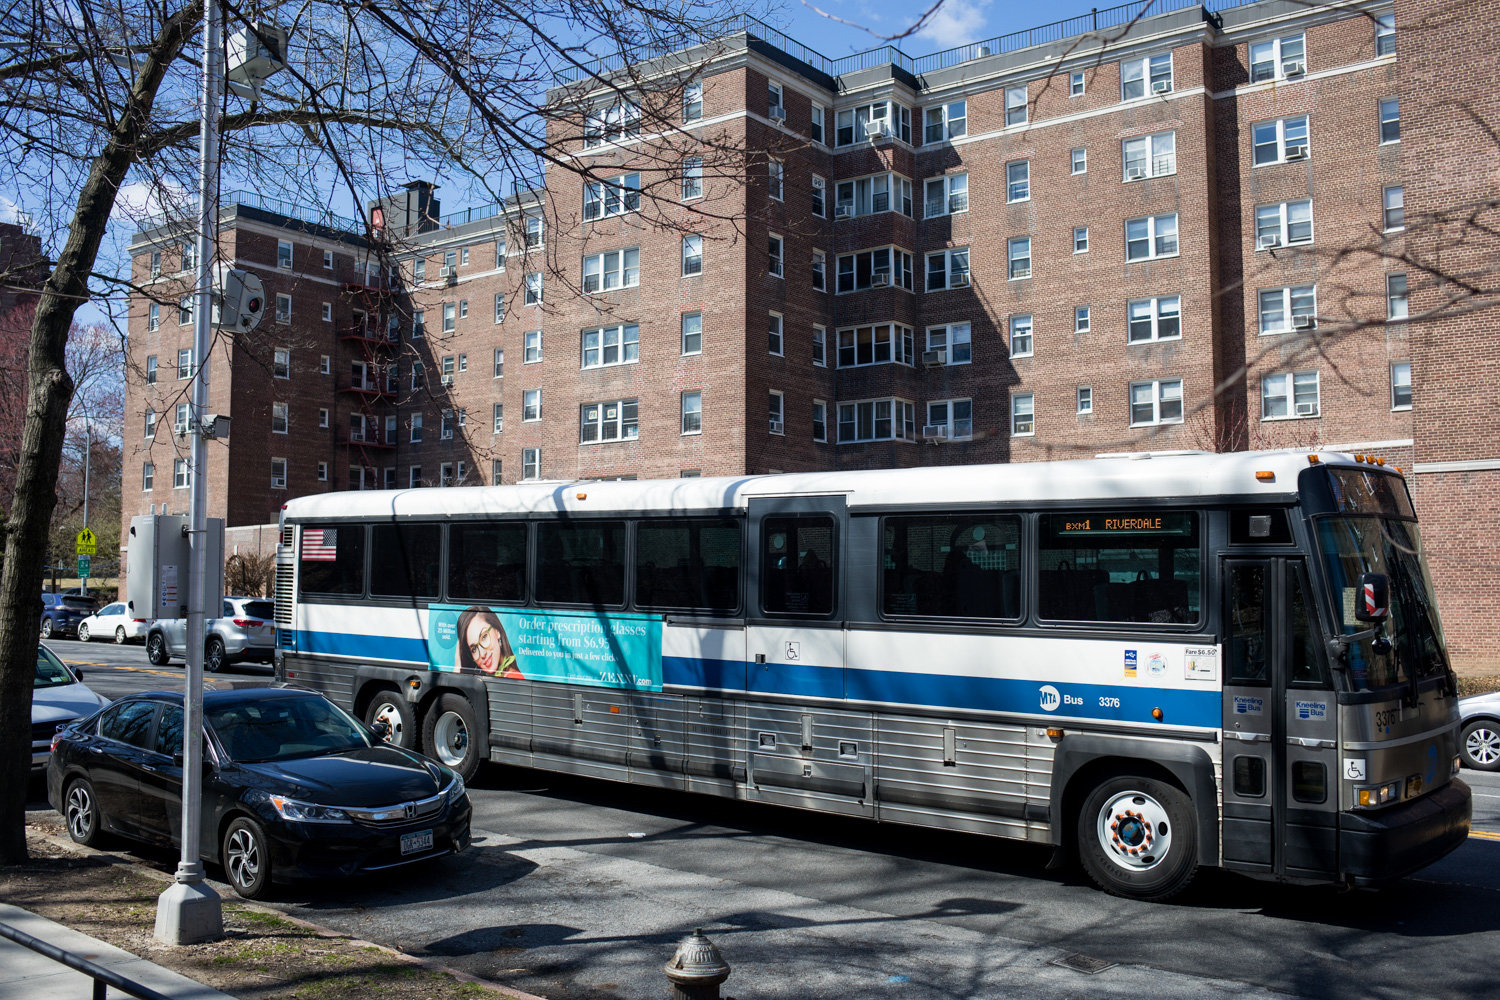 The MTA apparently is no longer looking to cut express bus service between Manhattan and the Bronx, according to borough president Ruben Diaz Jr.